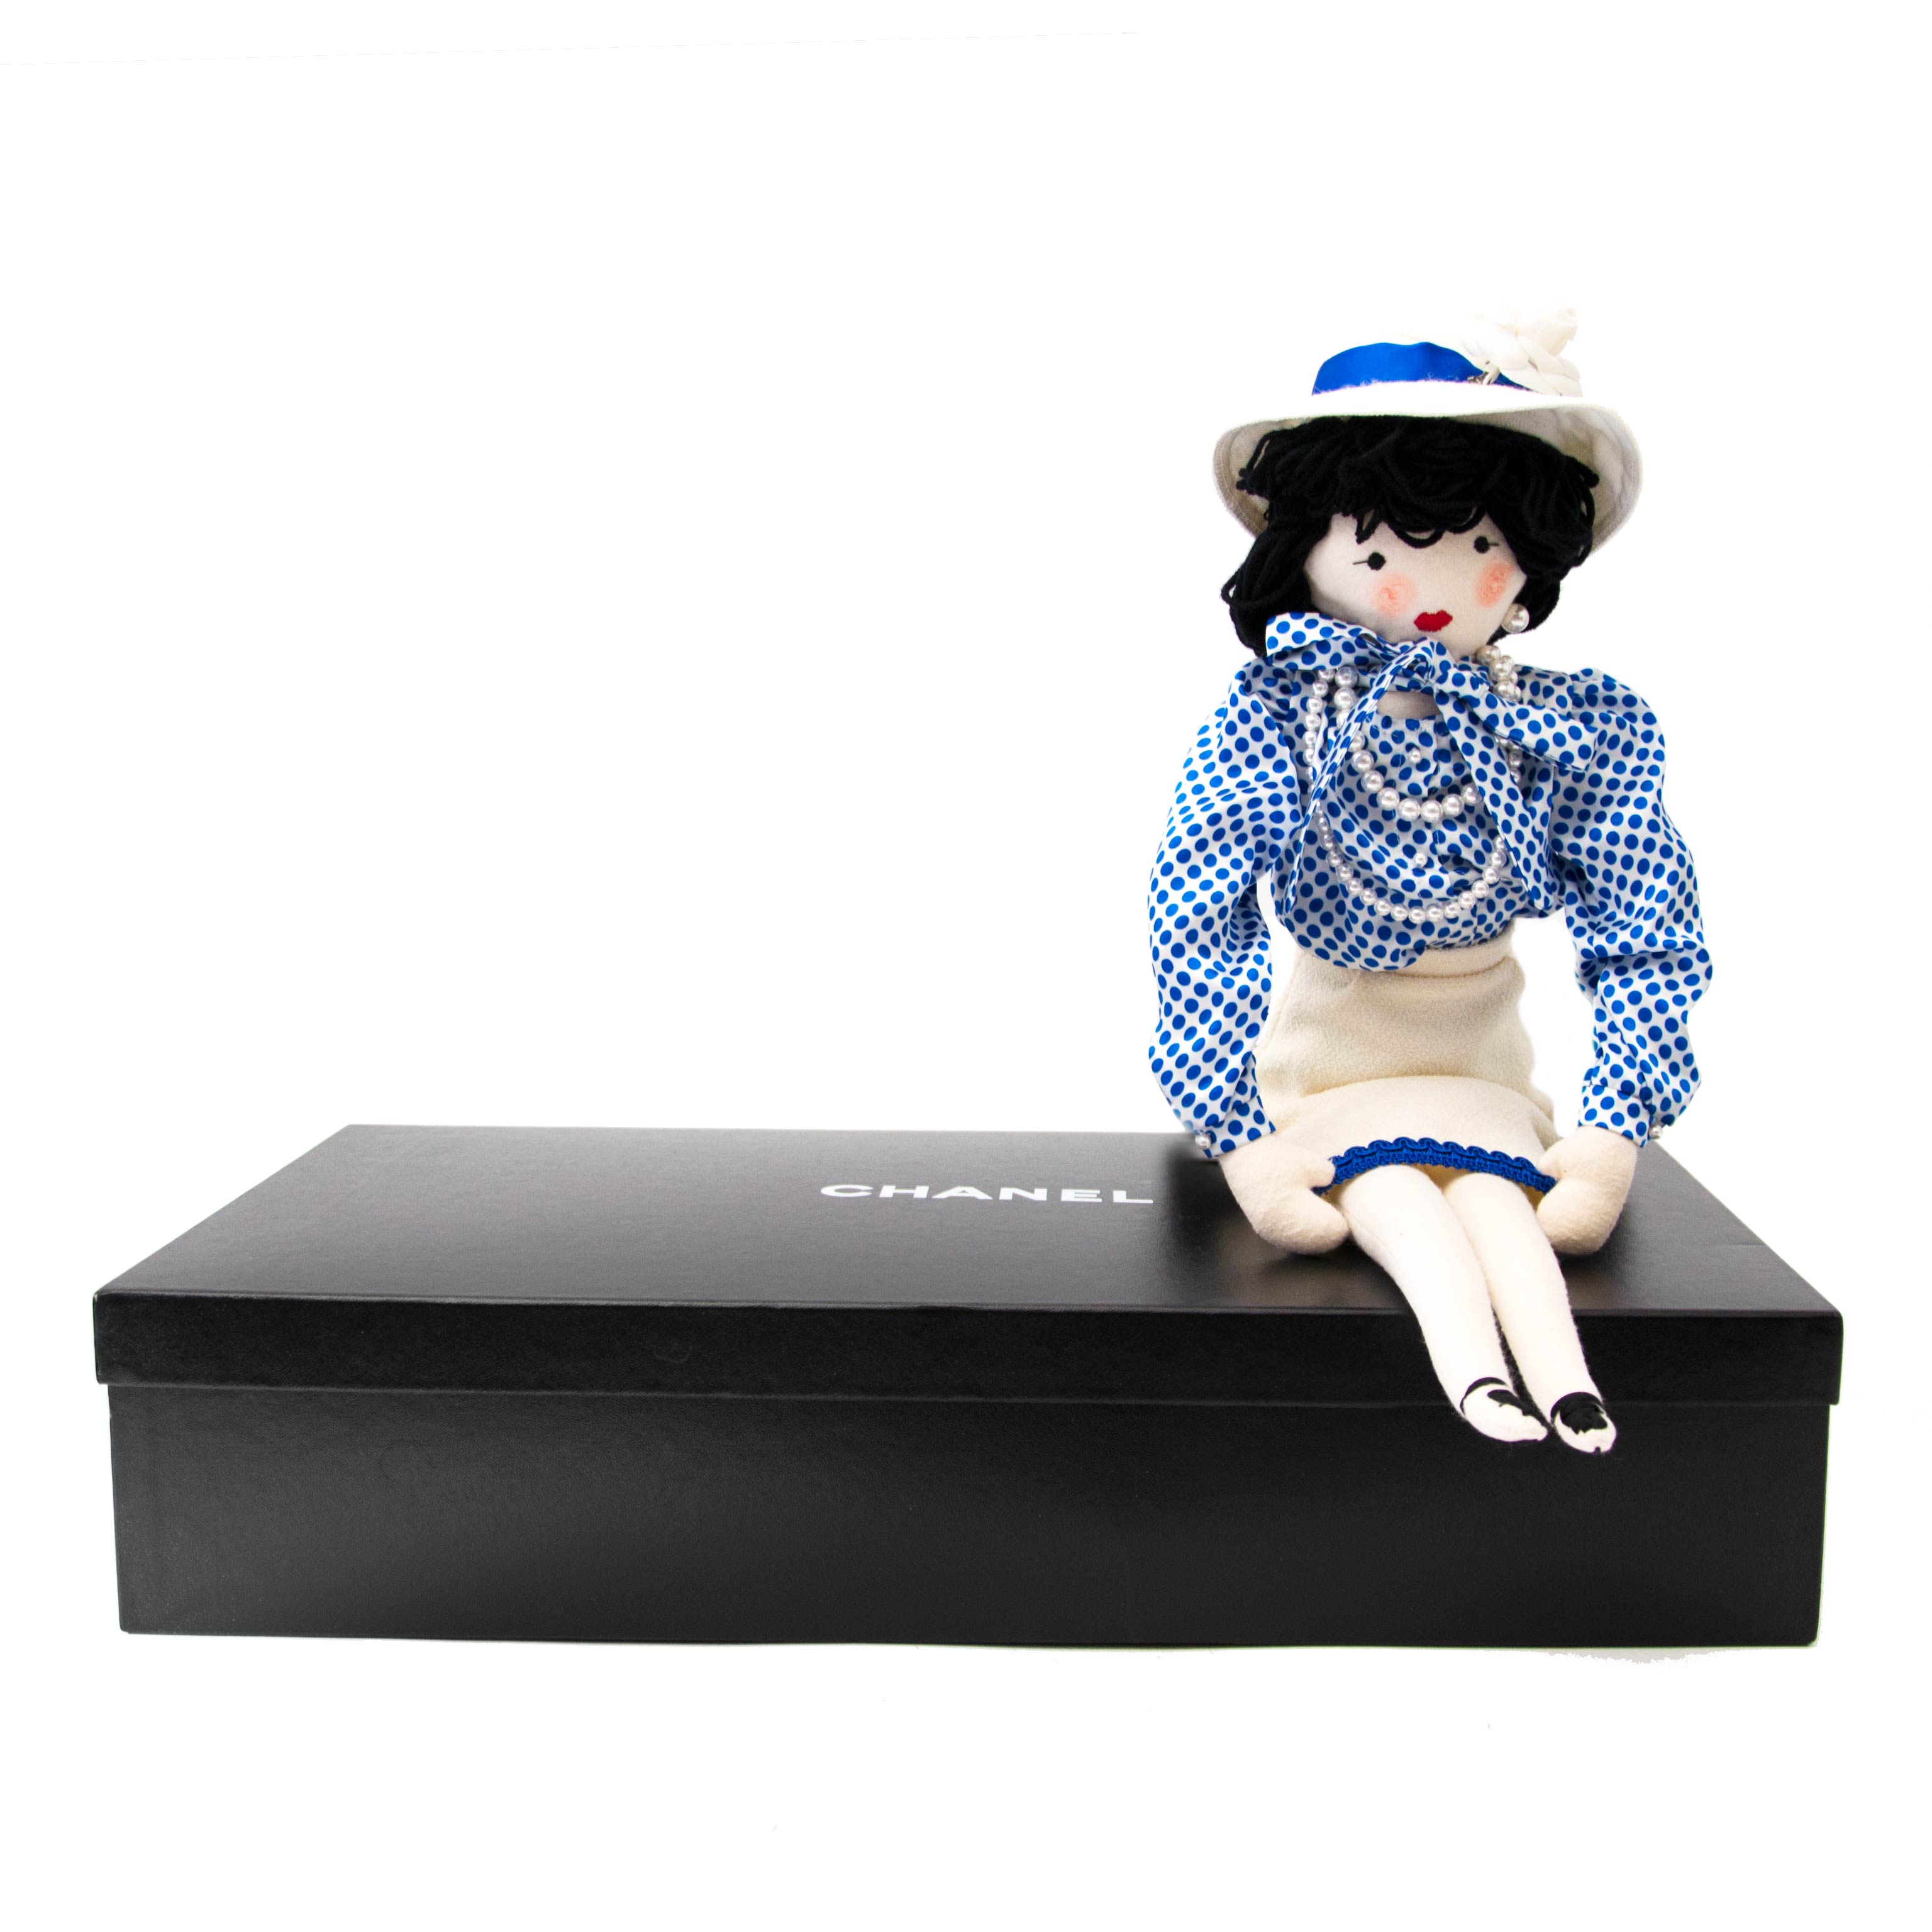 Super Rare Chanel Doll Designed By Karl Lagerfeld For Pop-Up Shop Colette ○  Labellov ○ Buy and Sell Authentic Luxury